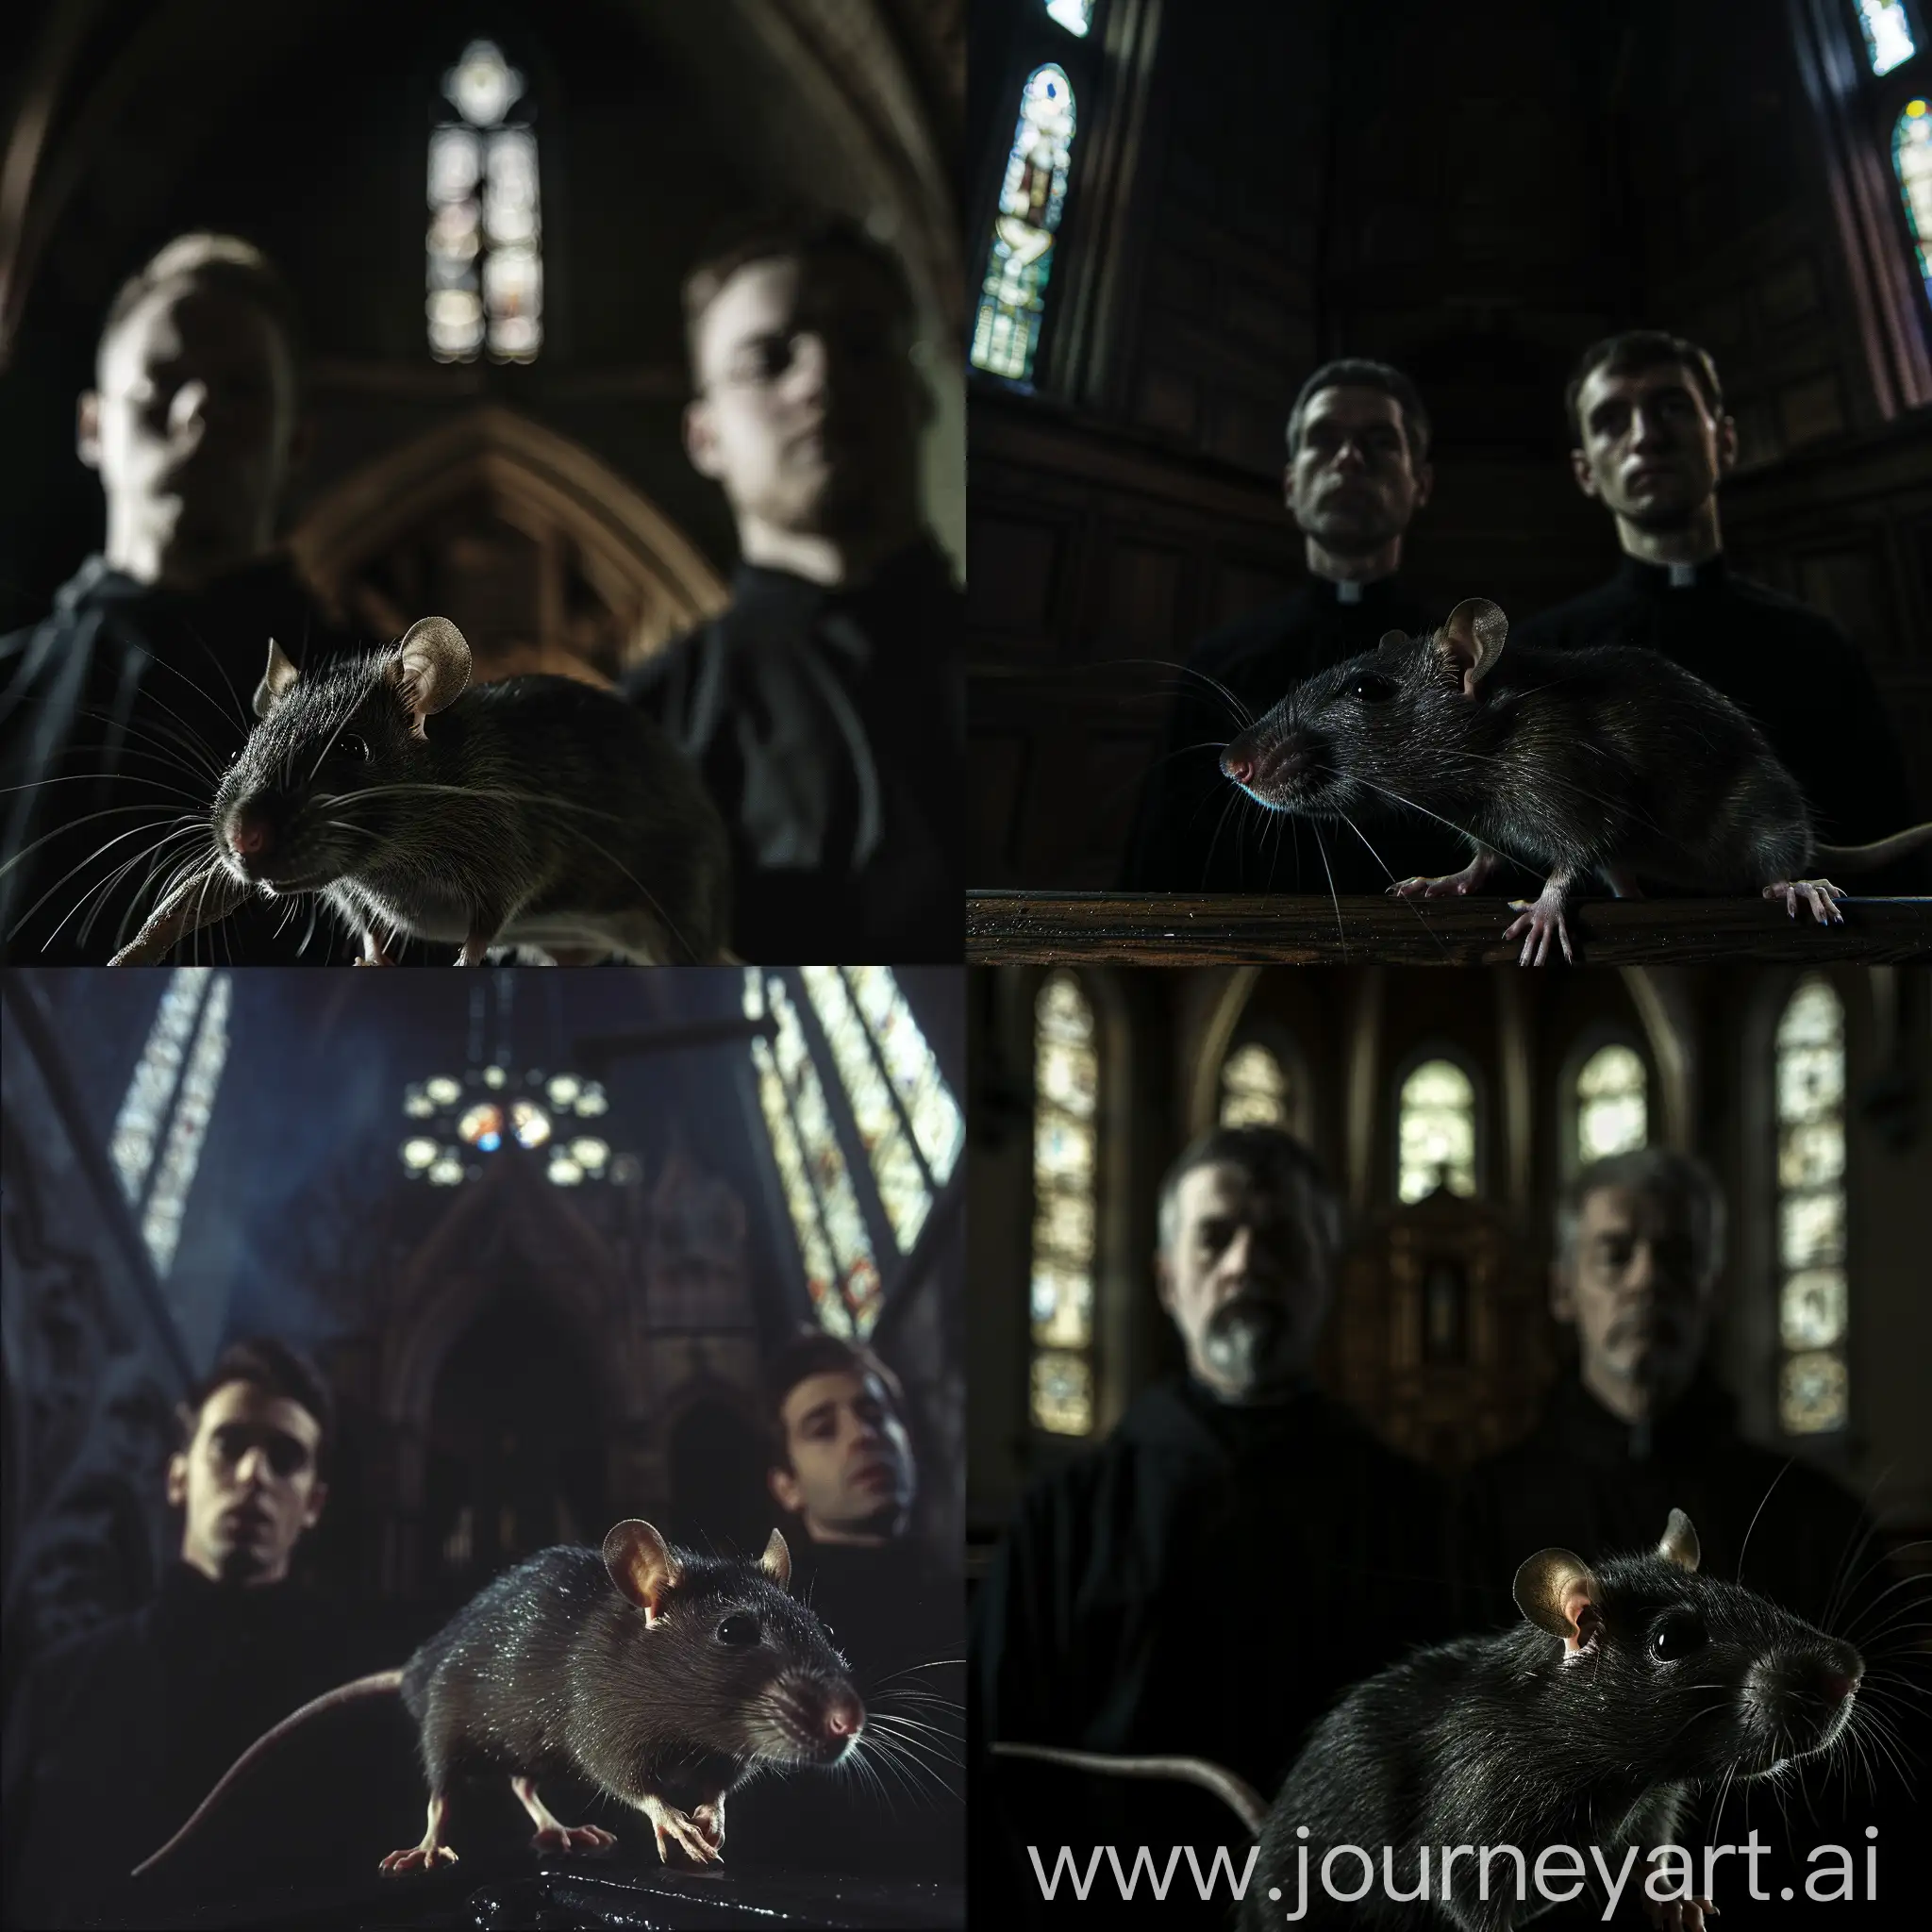 Mysterious-Encounter-Men-in-a-Dark-Chapel-with-a-Rat-Carrying-a-Bone